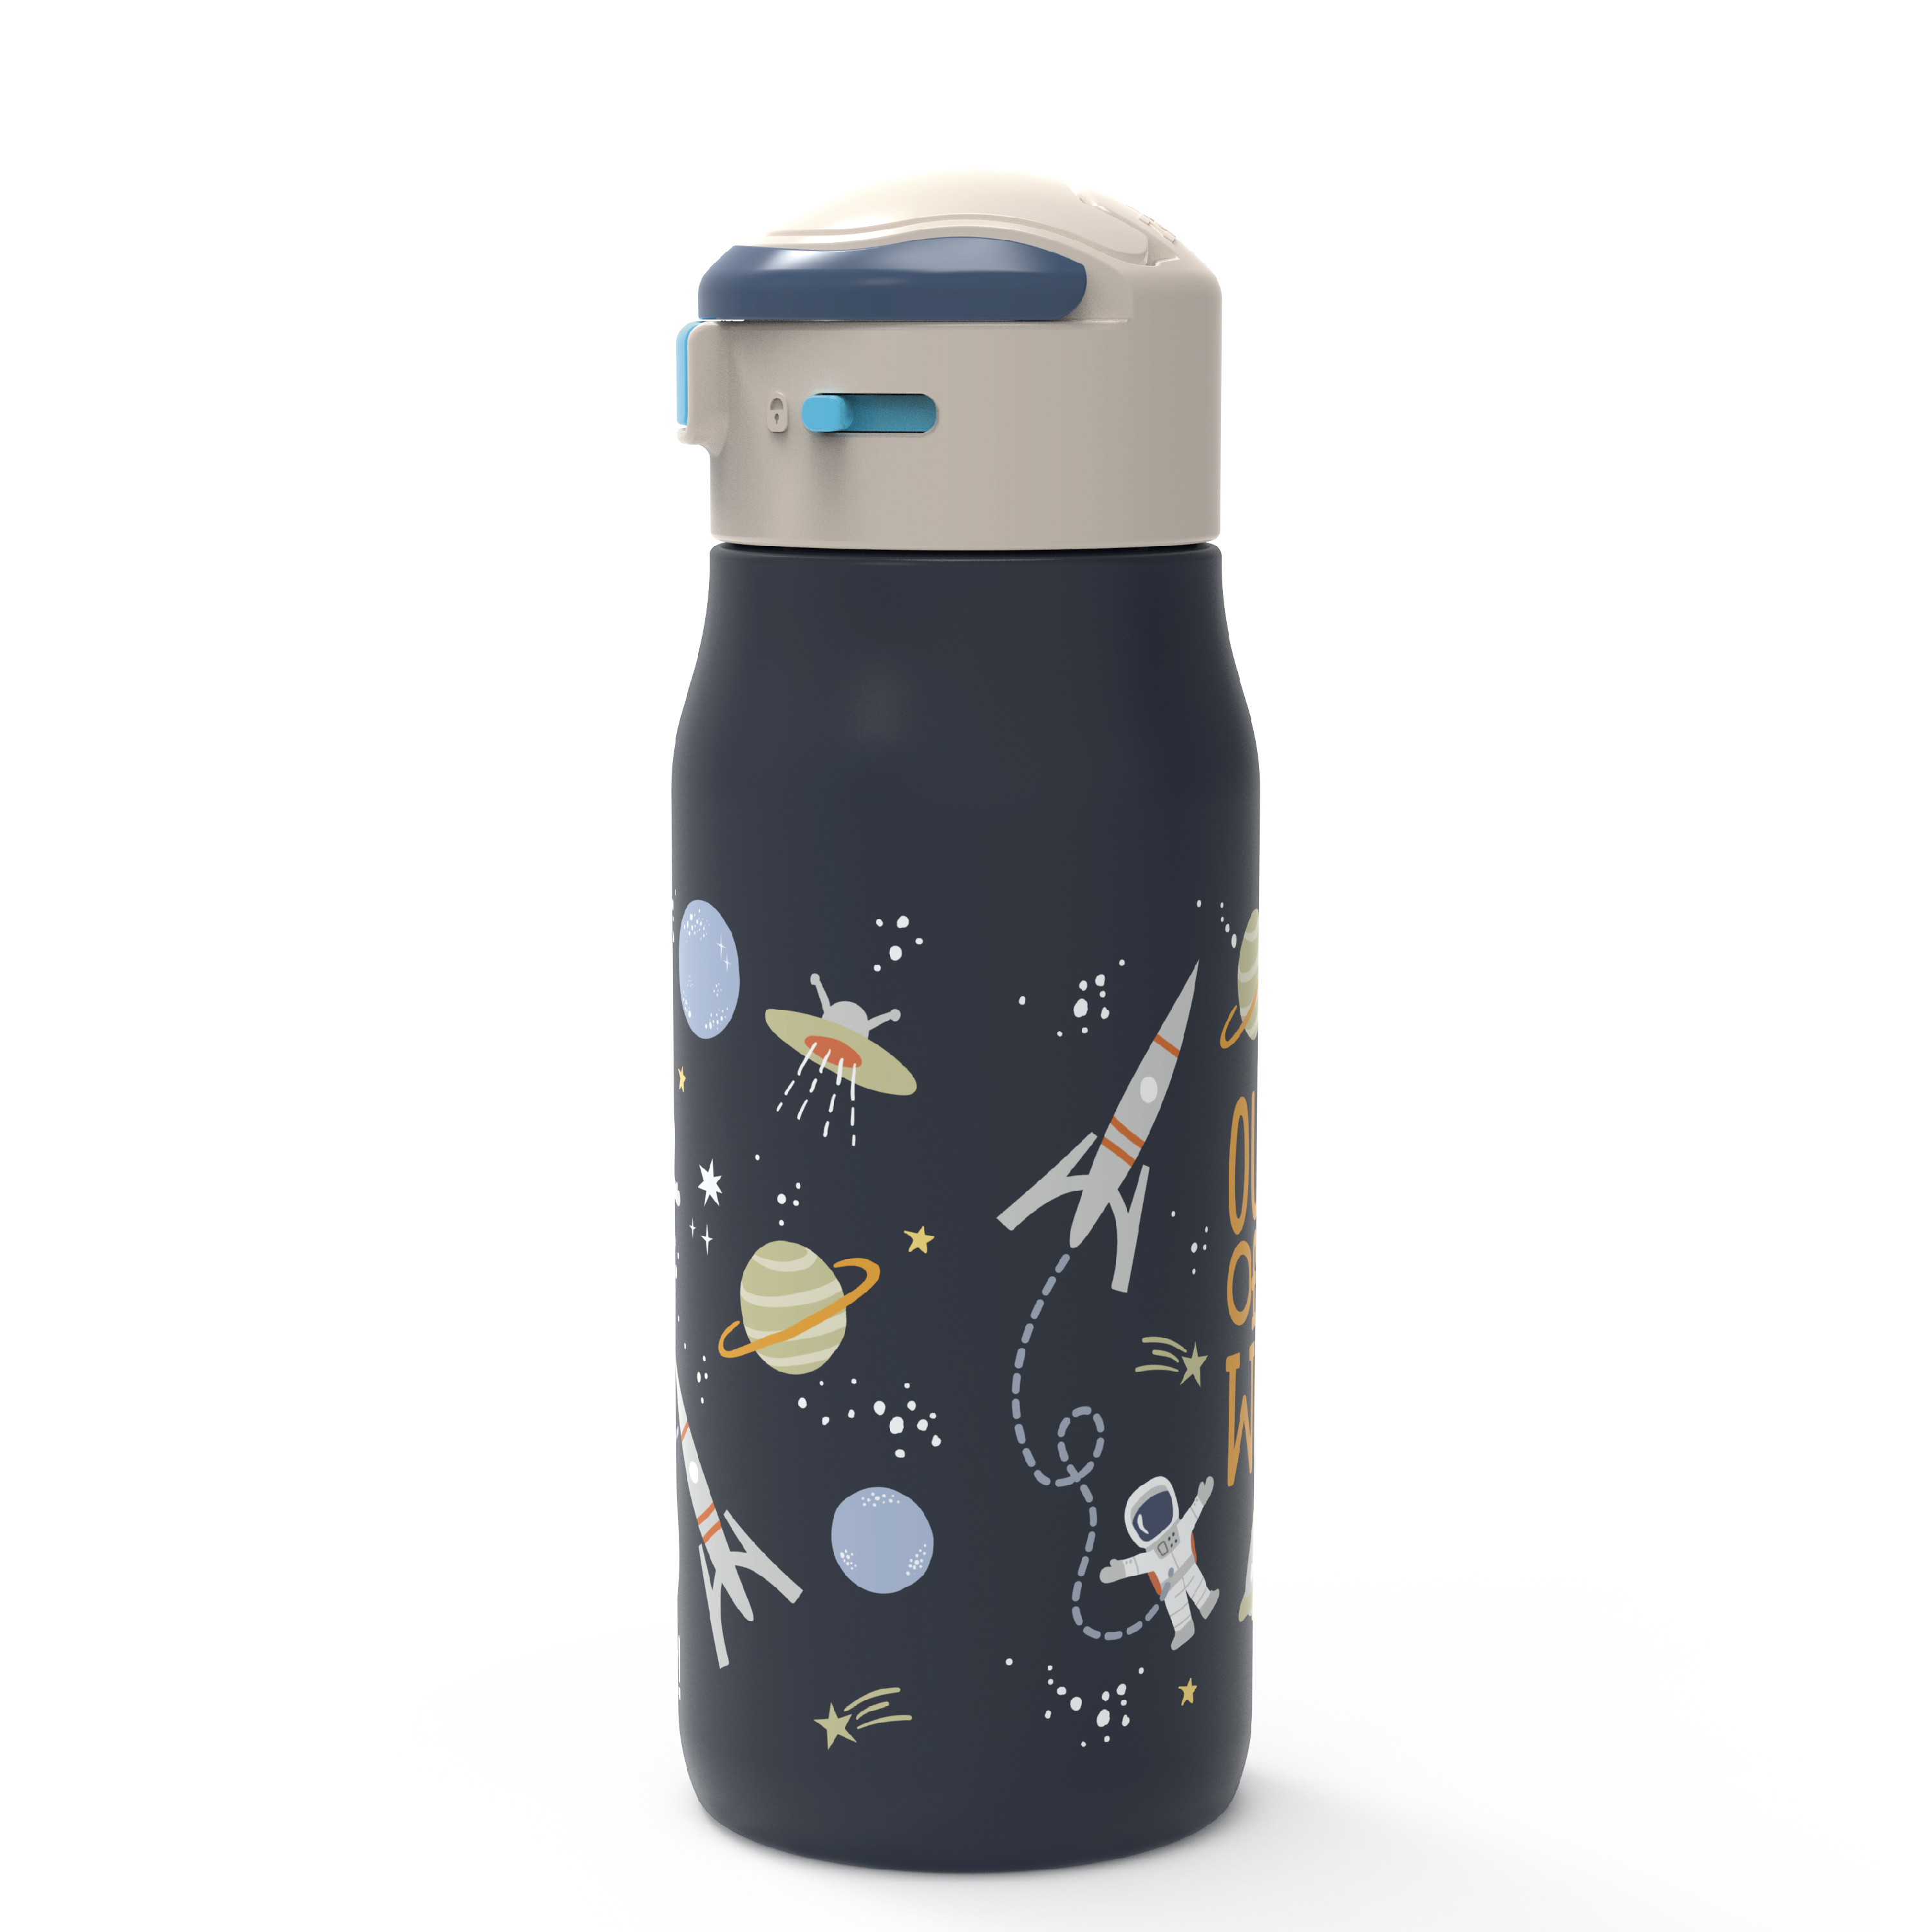 Zak Kids 13.5 ounce Mesa Double Wall Insulated Stainless Steel Water Bottle, Outer Space slideshow image 3